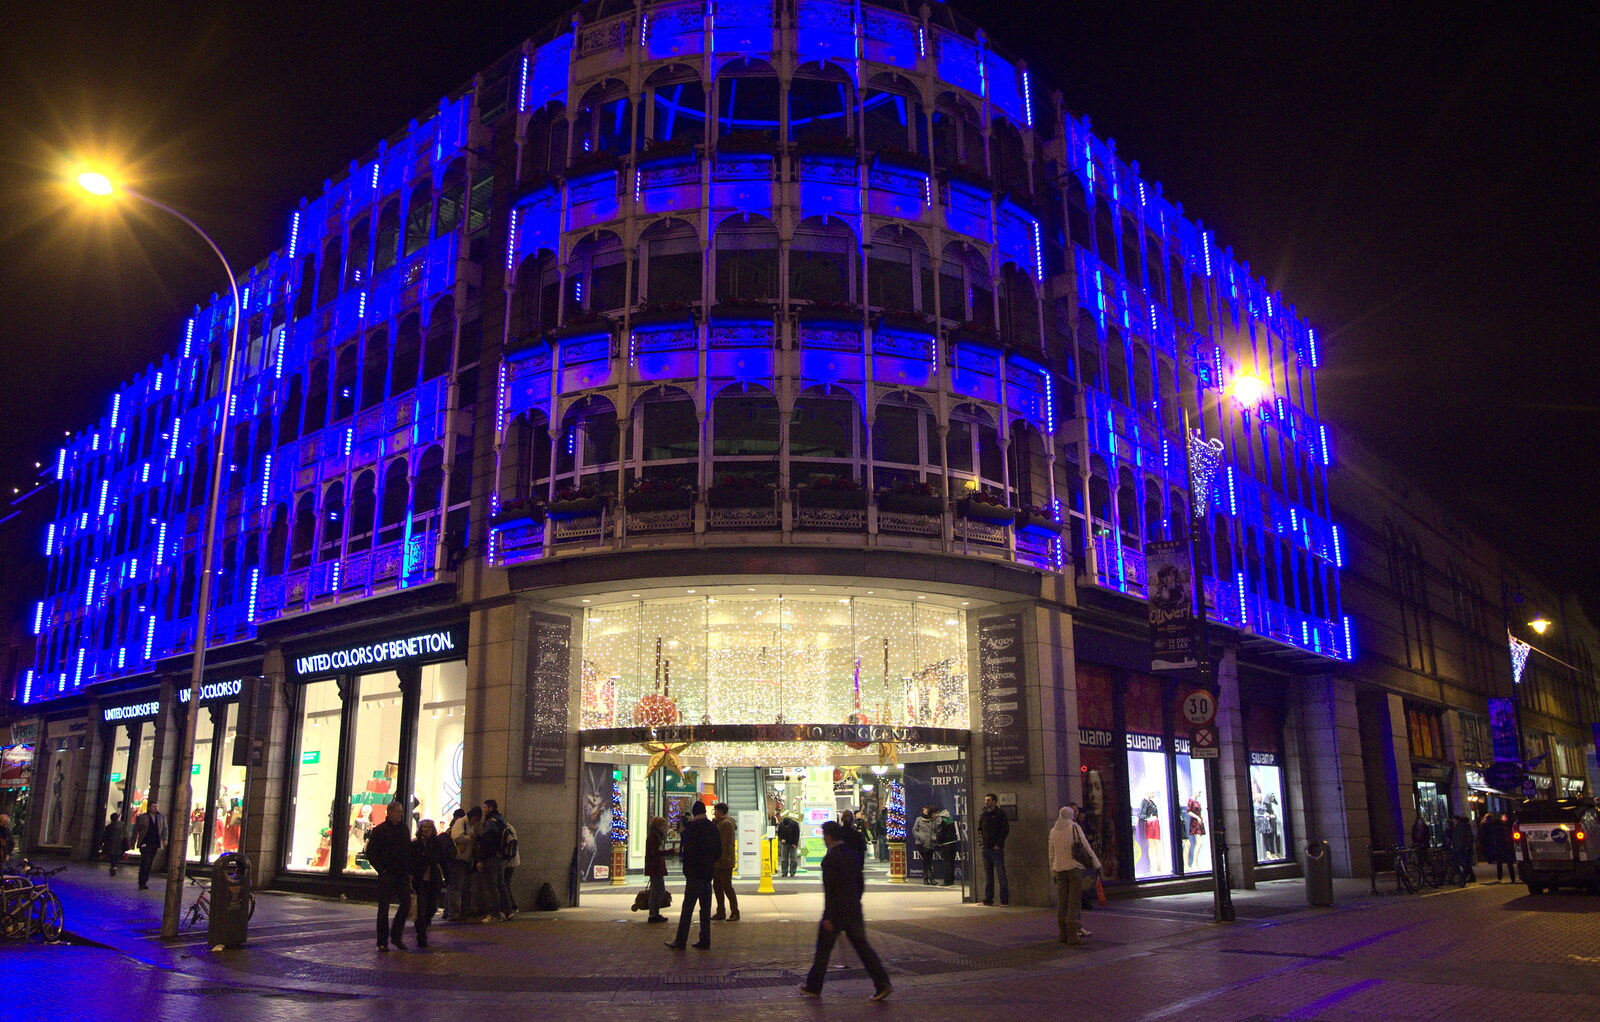 Brightly-lit Benetton store in Dublin from A Night on the Lash, Dublin, Ireland - 14th December 2012